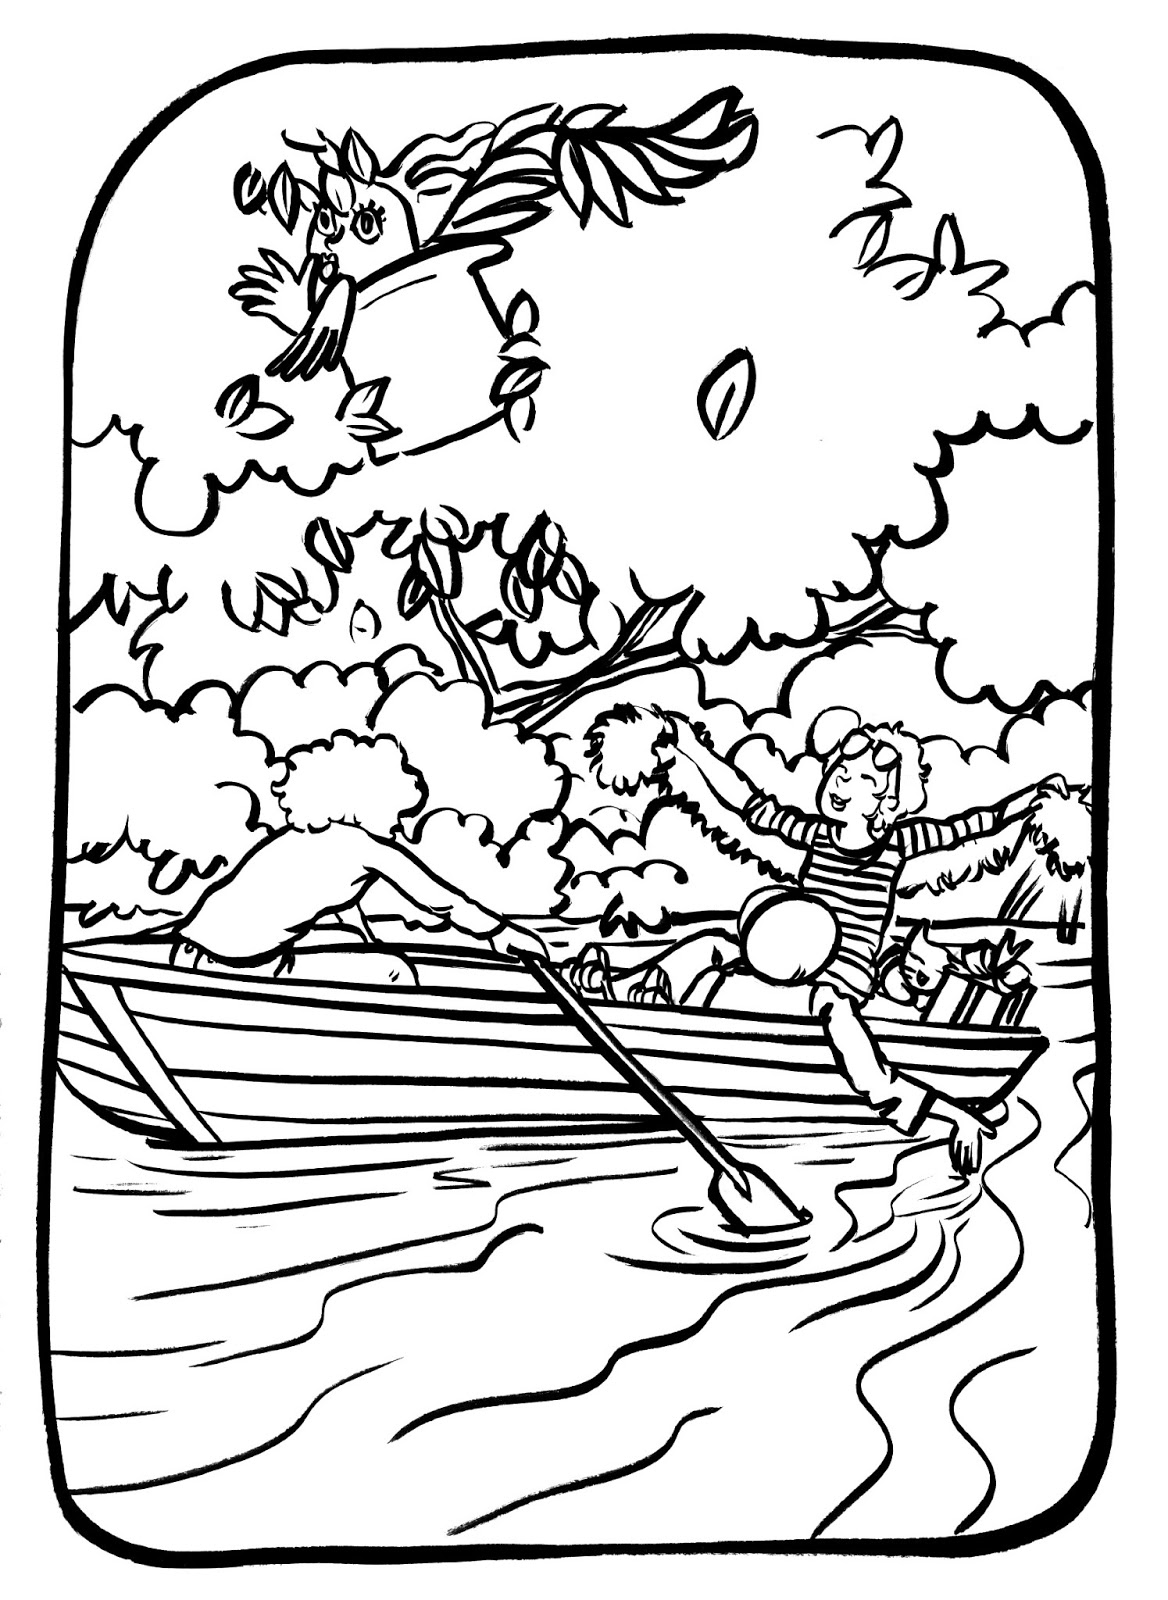 Coloring page: Small boat / Canoe (Transportation) #142328 - Free Printable Coloring Pages